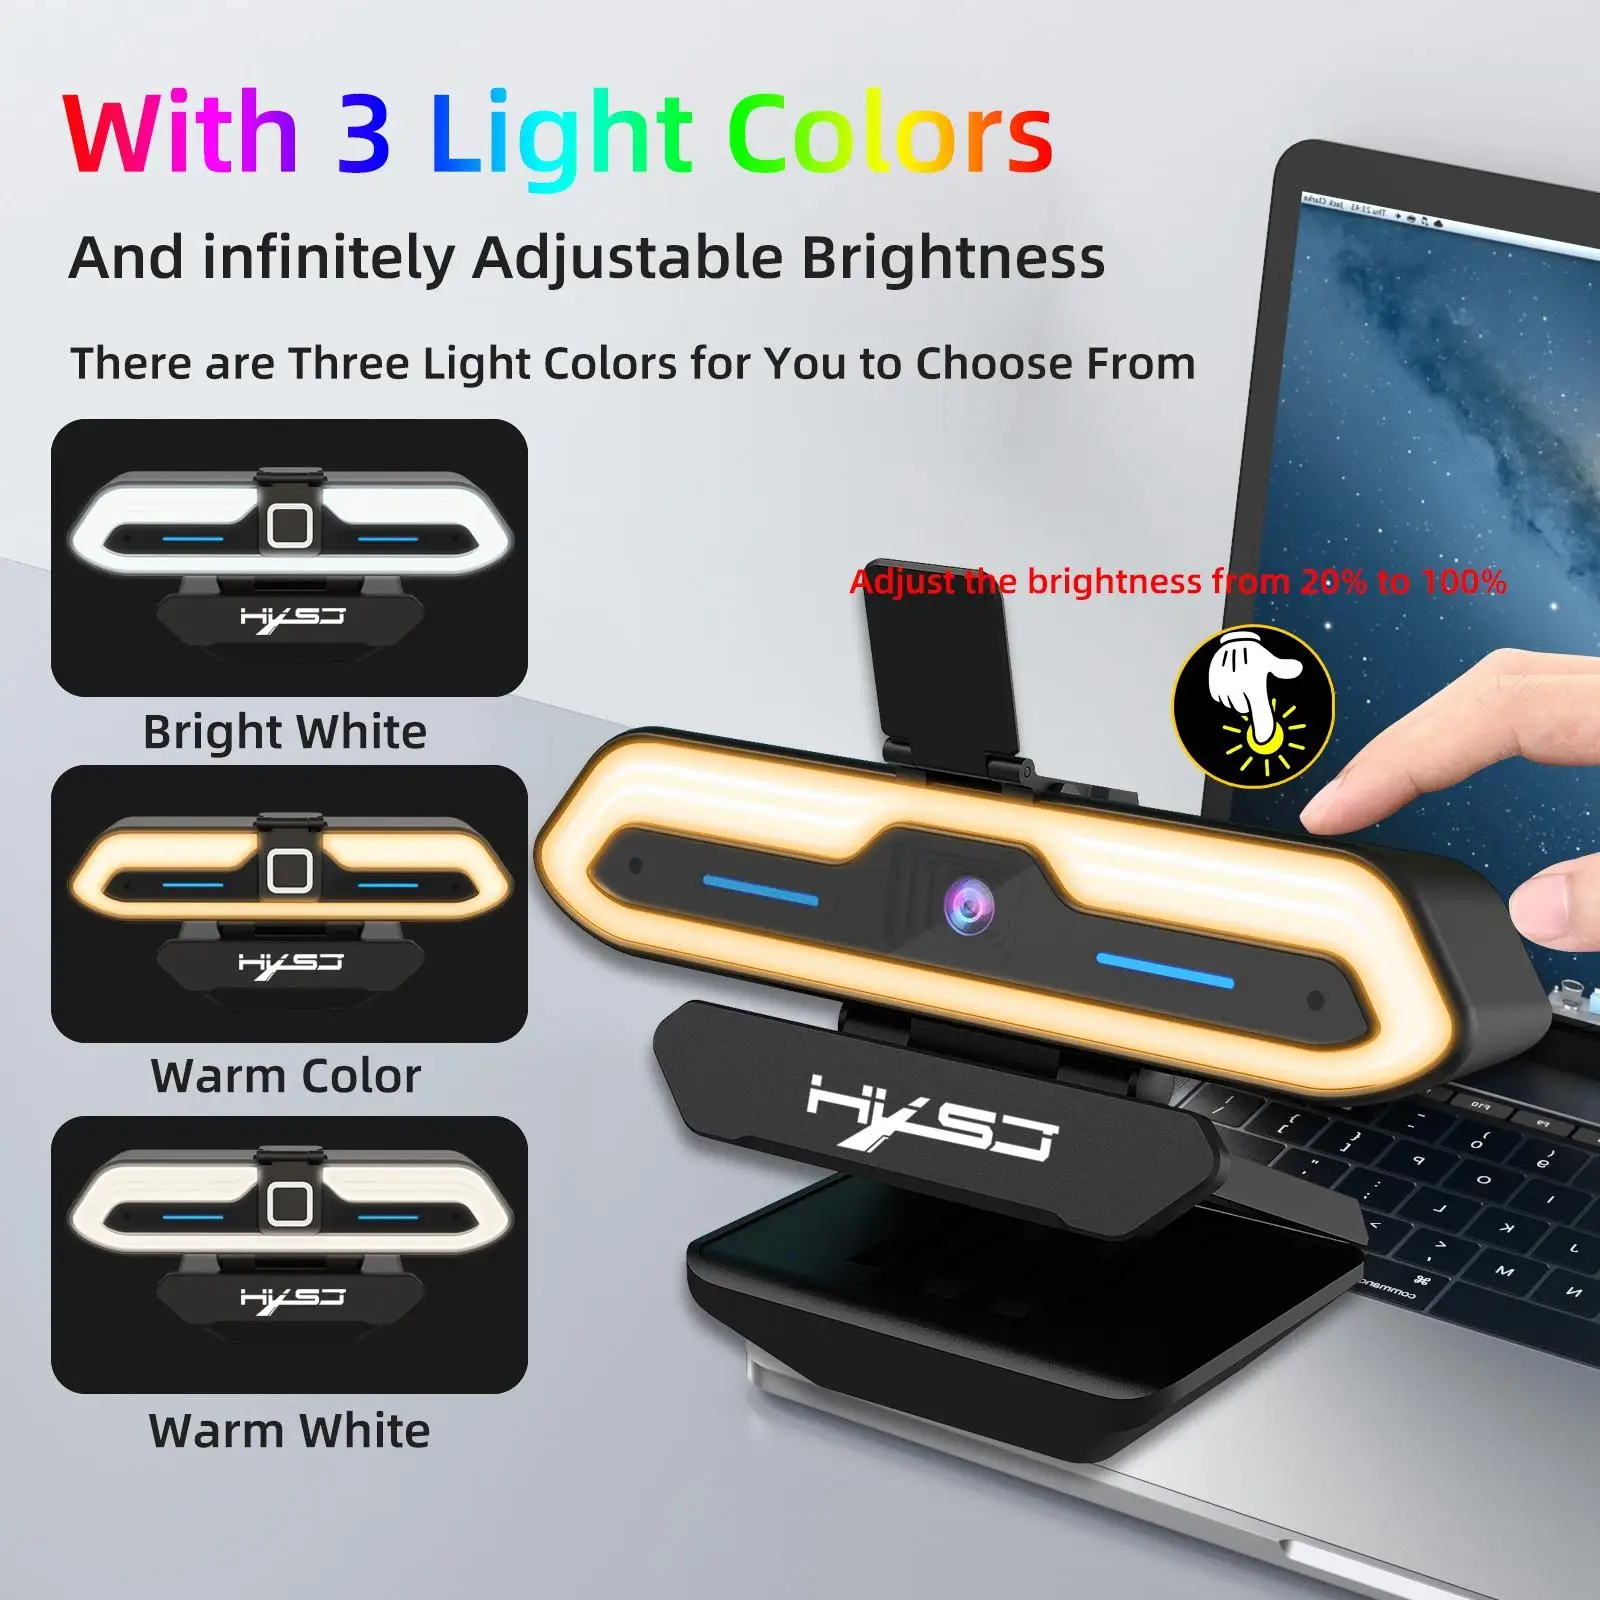 Full HD 1080P Webcam Light Effects AutoFocus Webcam 60FPS USB Web Cam for PC Laptops Video Calling Computer Plug and Play